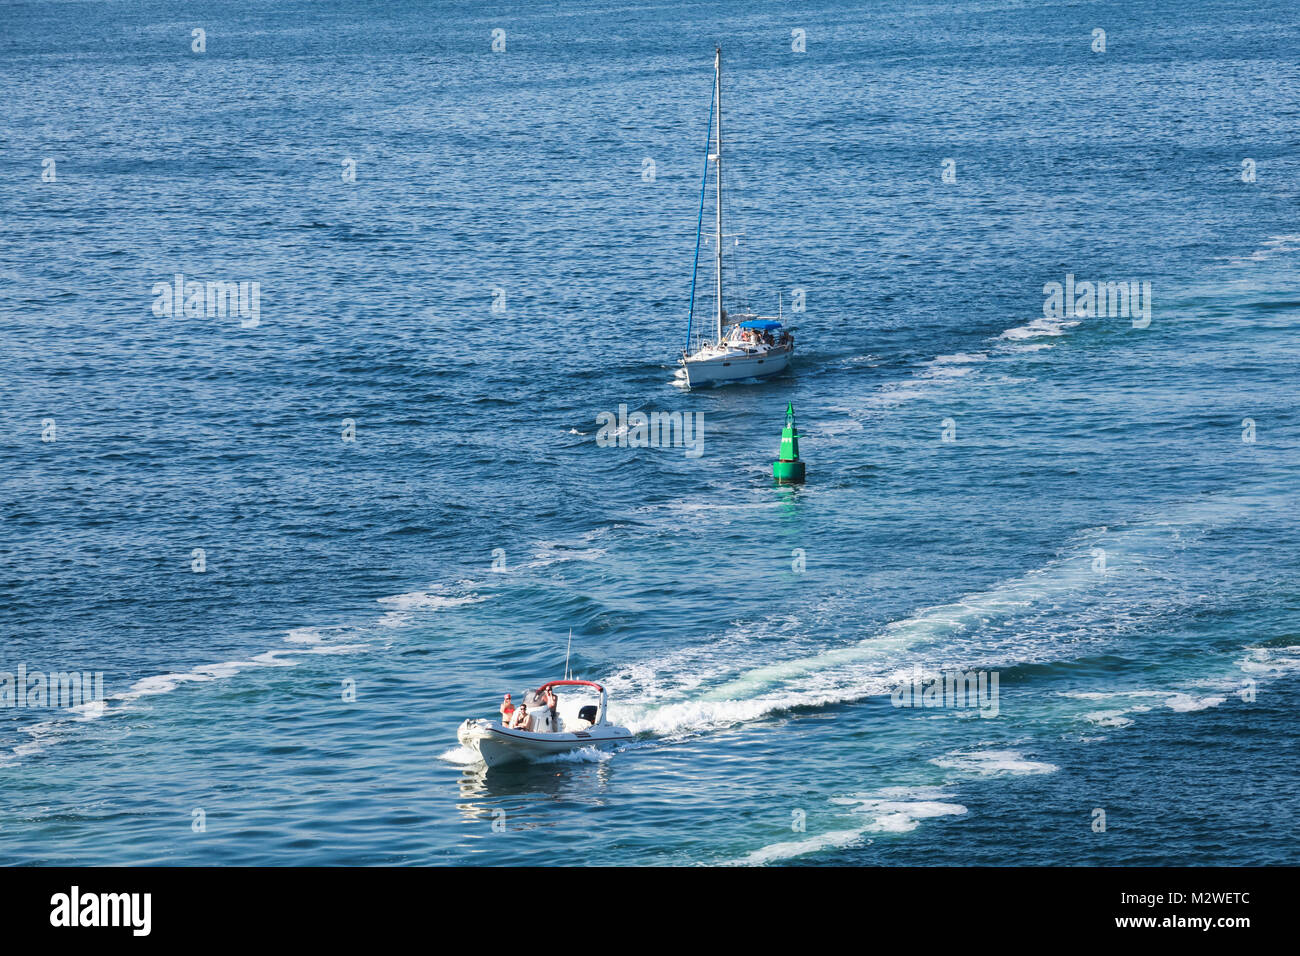 Corsica, France - July 2, 2015: Pleasure motor boat and sailing yacht with passengers go on fairway Stock Photo